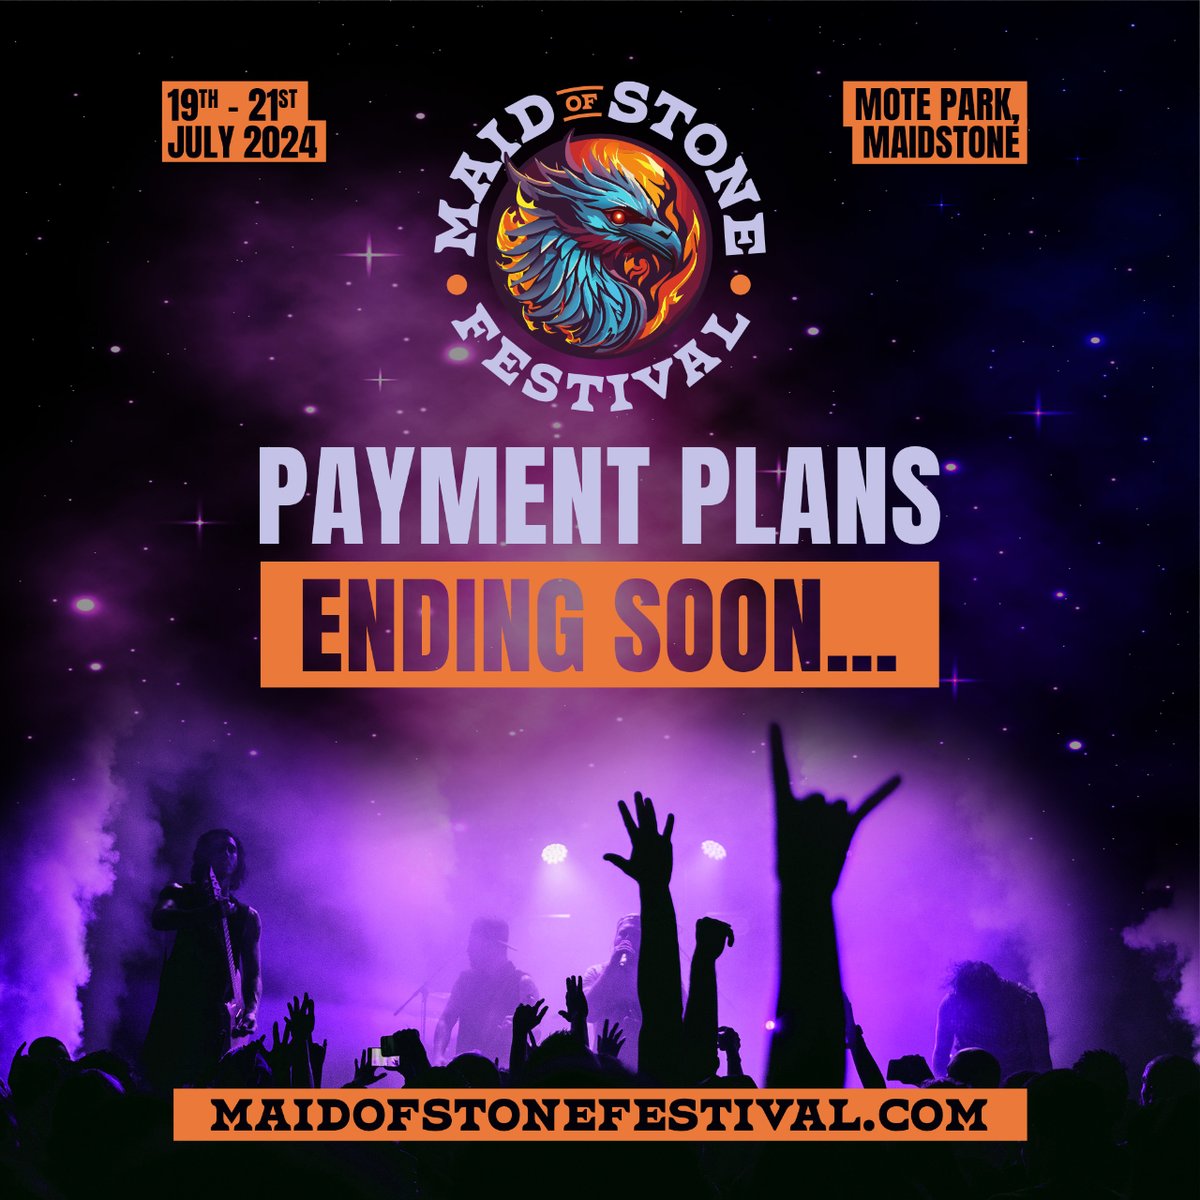 Although weekend Payment Plans have closed, you can still get a Saturday or Sunday day ticket for just £20 deposit (plus fees). These are available for one more week, so don't delay if you want to use this service to secure your summer at MoS
#paymentplans #rockfestival